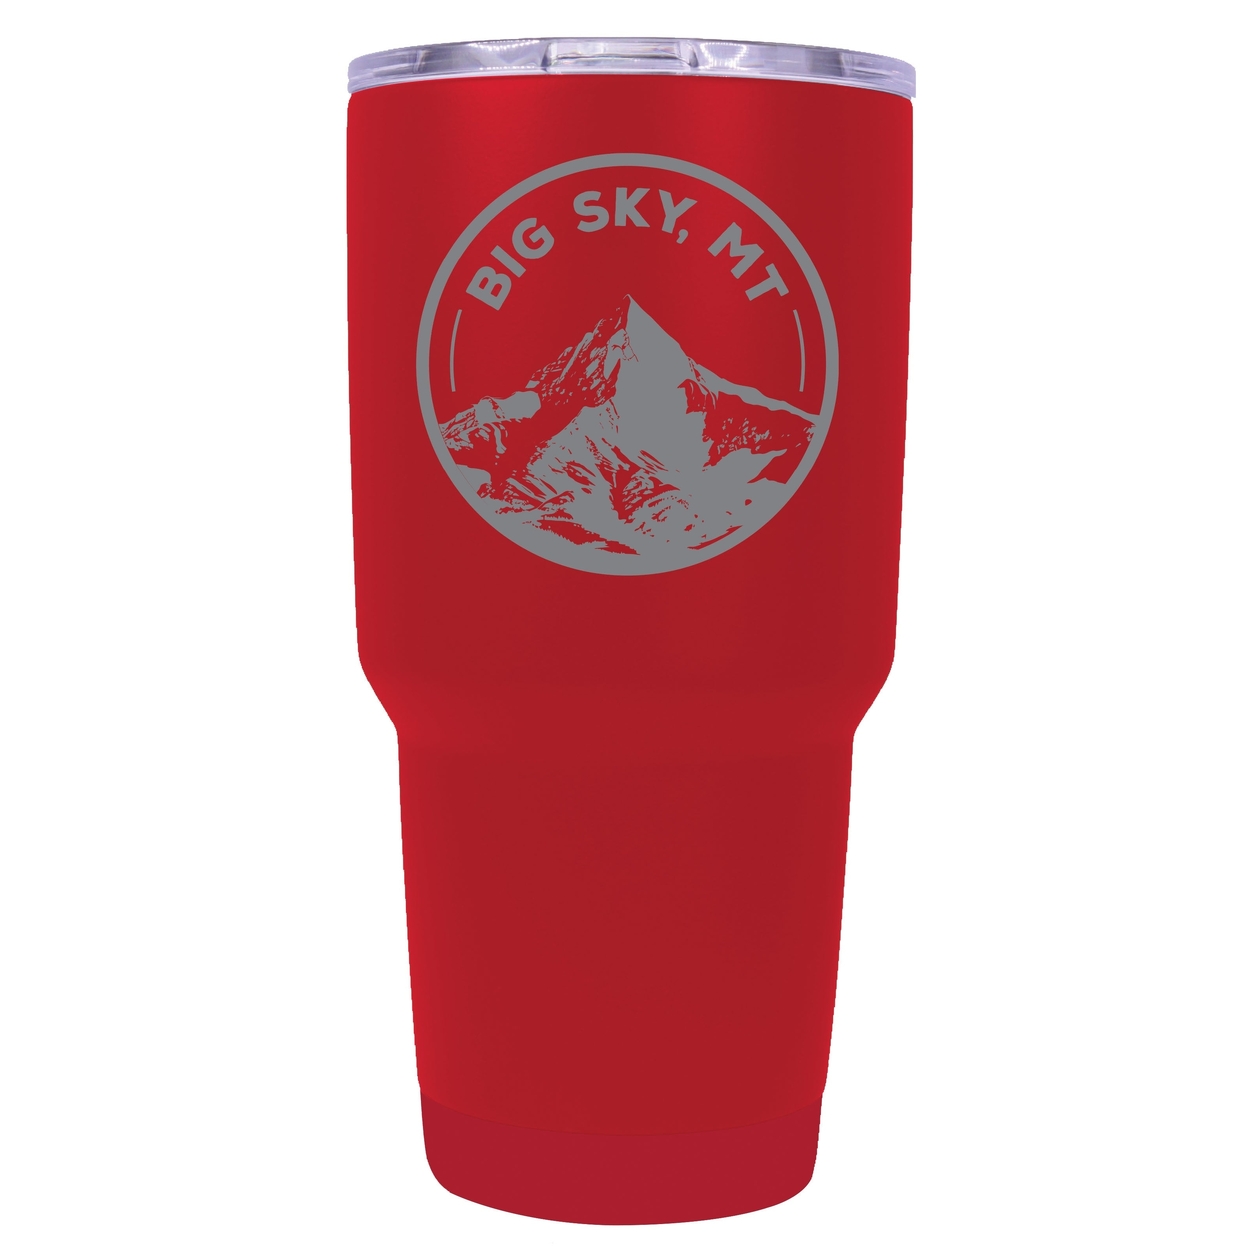 Big Sky Montana Souvenir 24 Oz Engraved Insulated Stainless Steel Tumbler - Green,,2-Pack